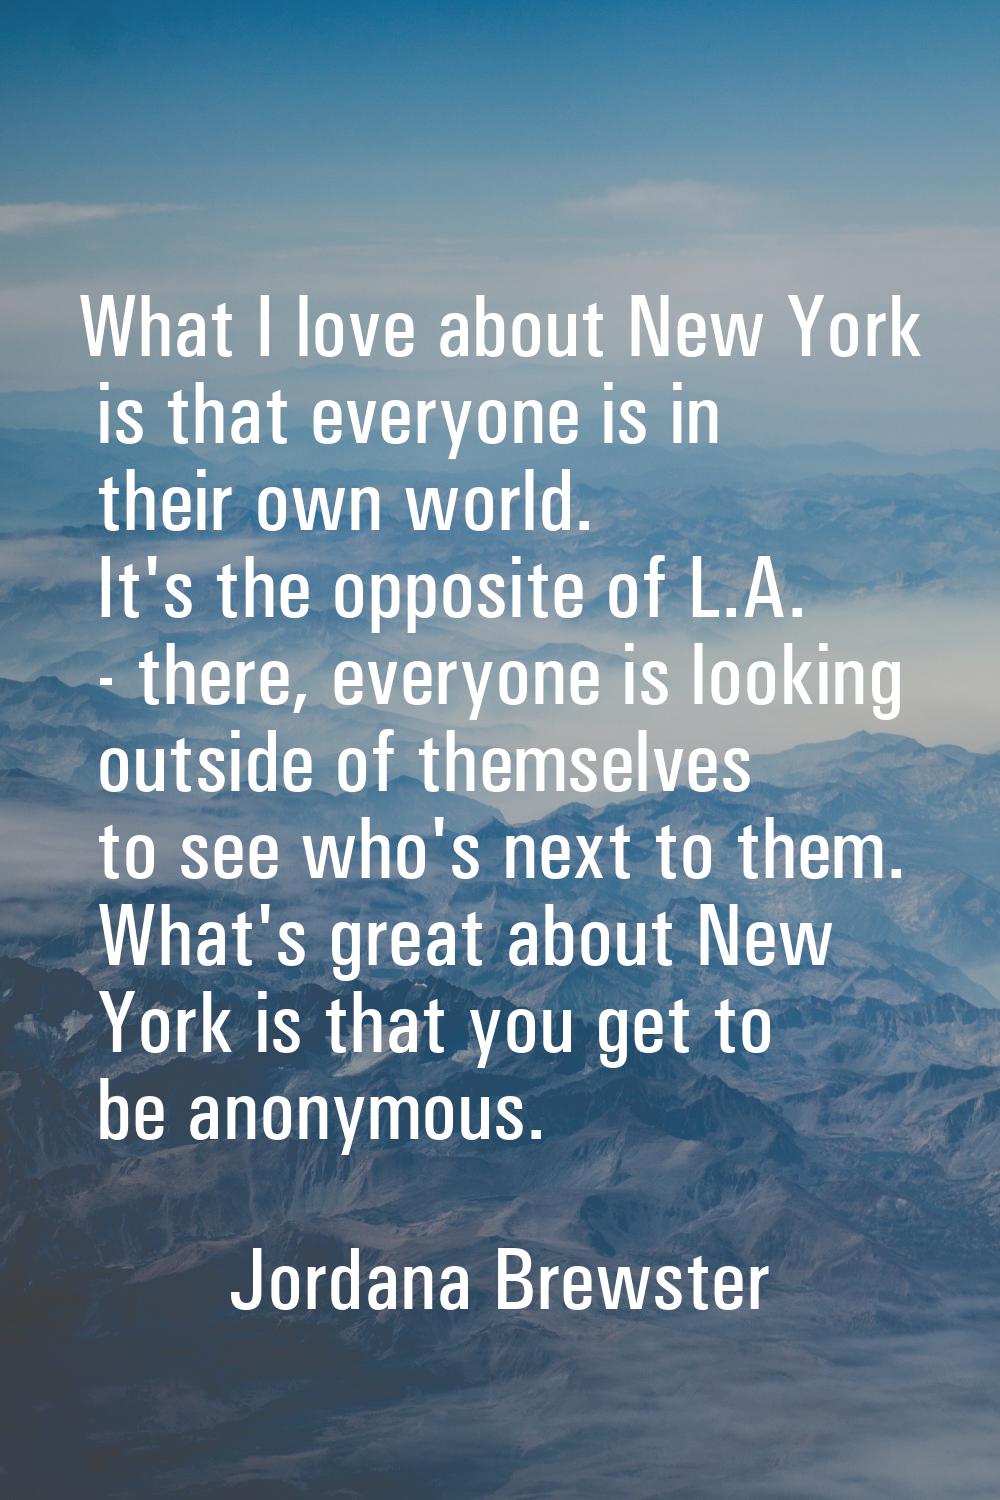 What I love about New York is that everyone is in their own world. It's the opposite of L.A. - ther